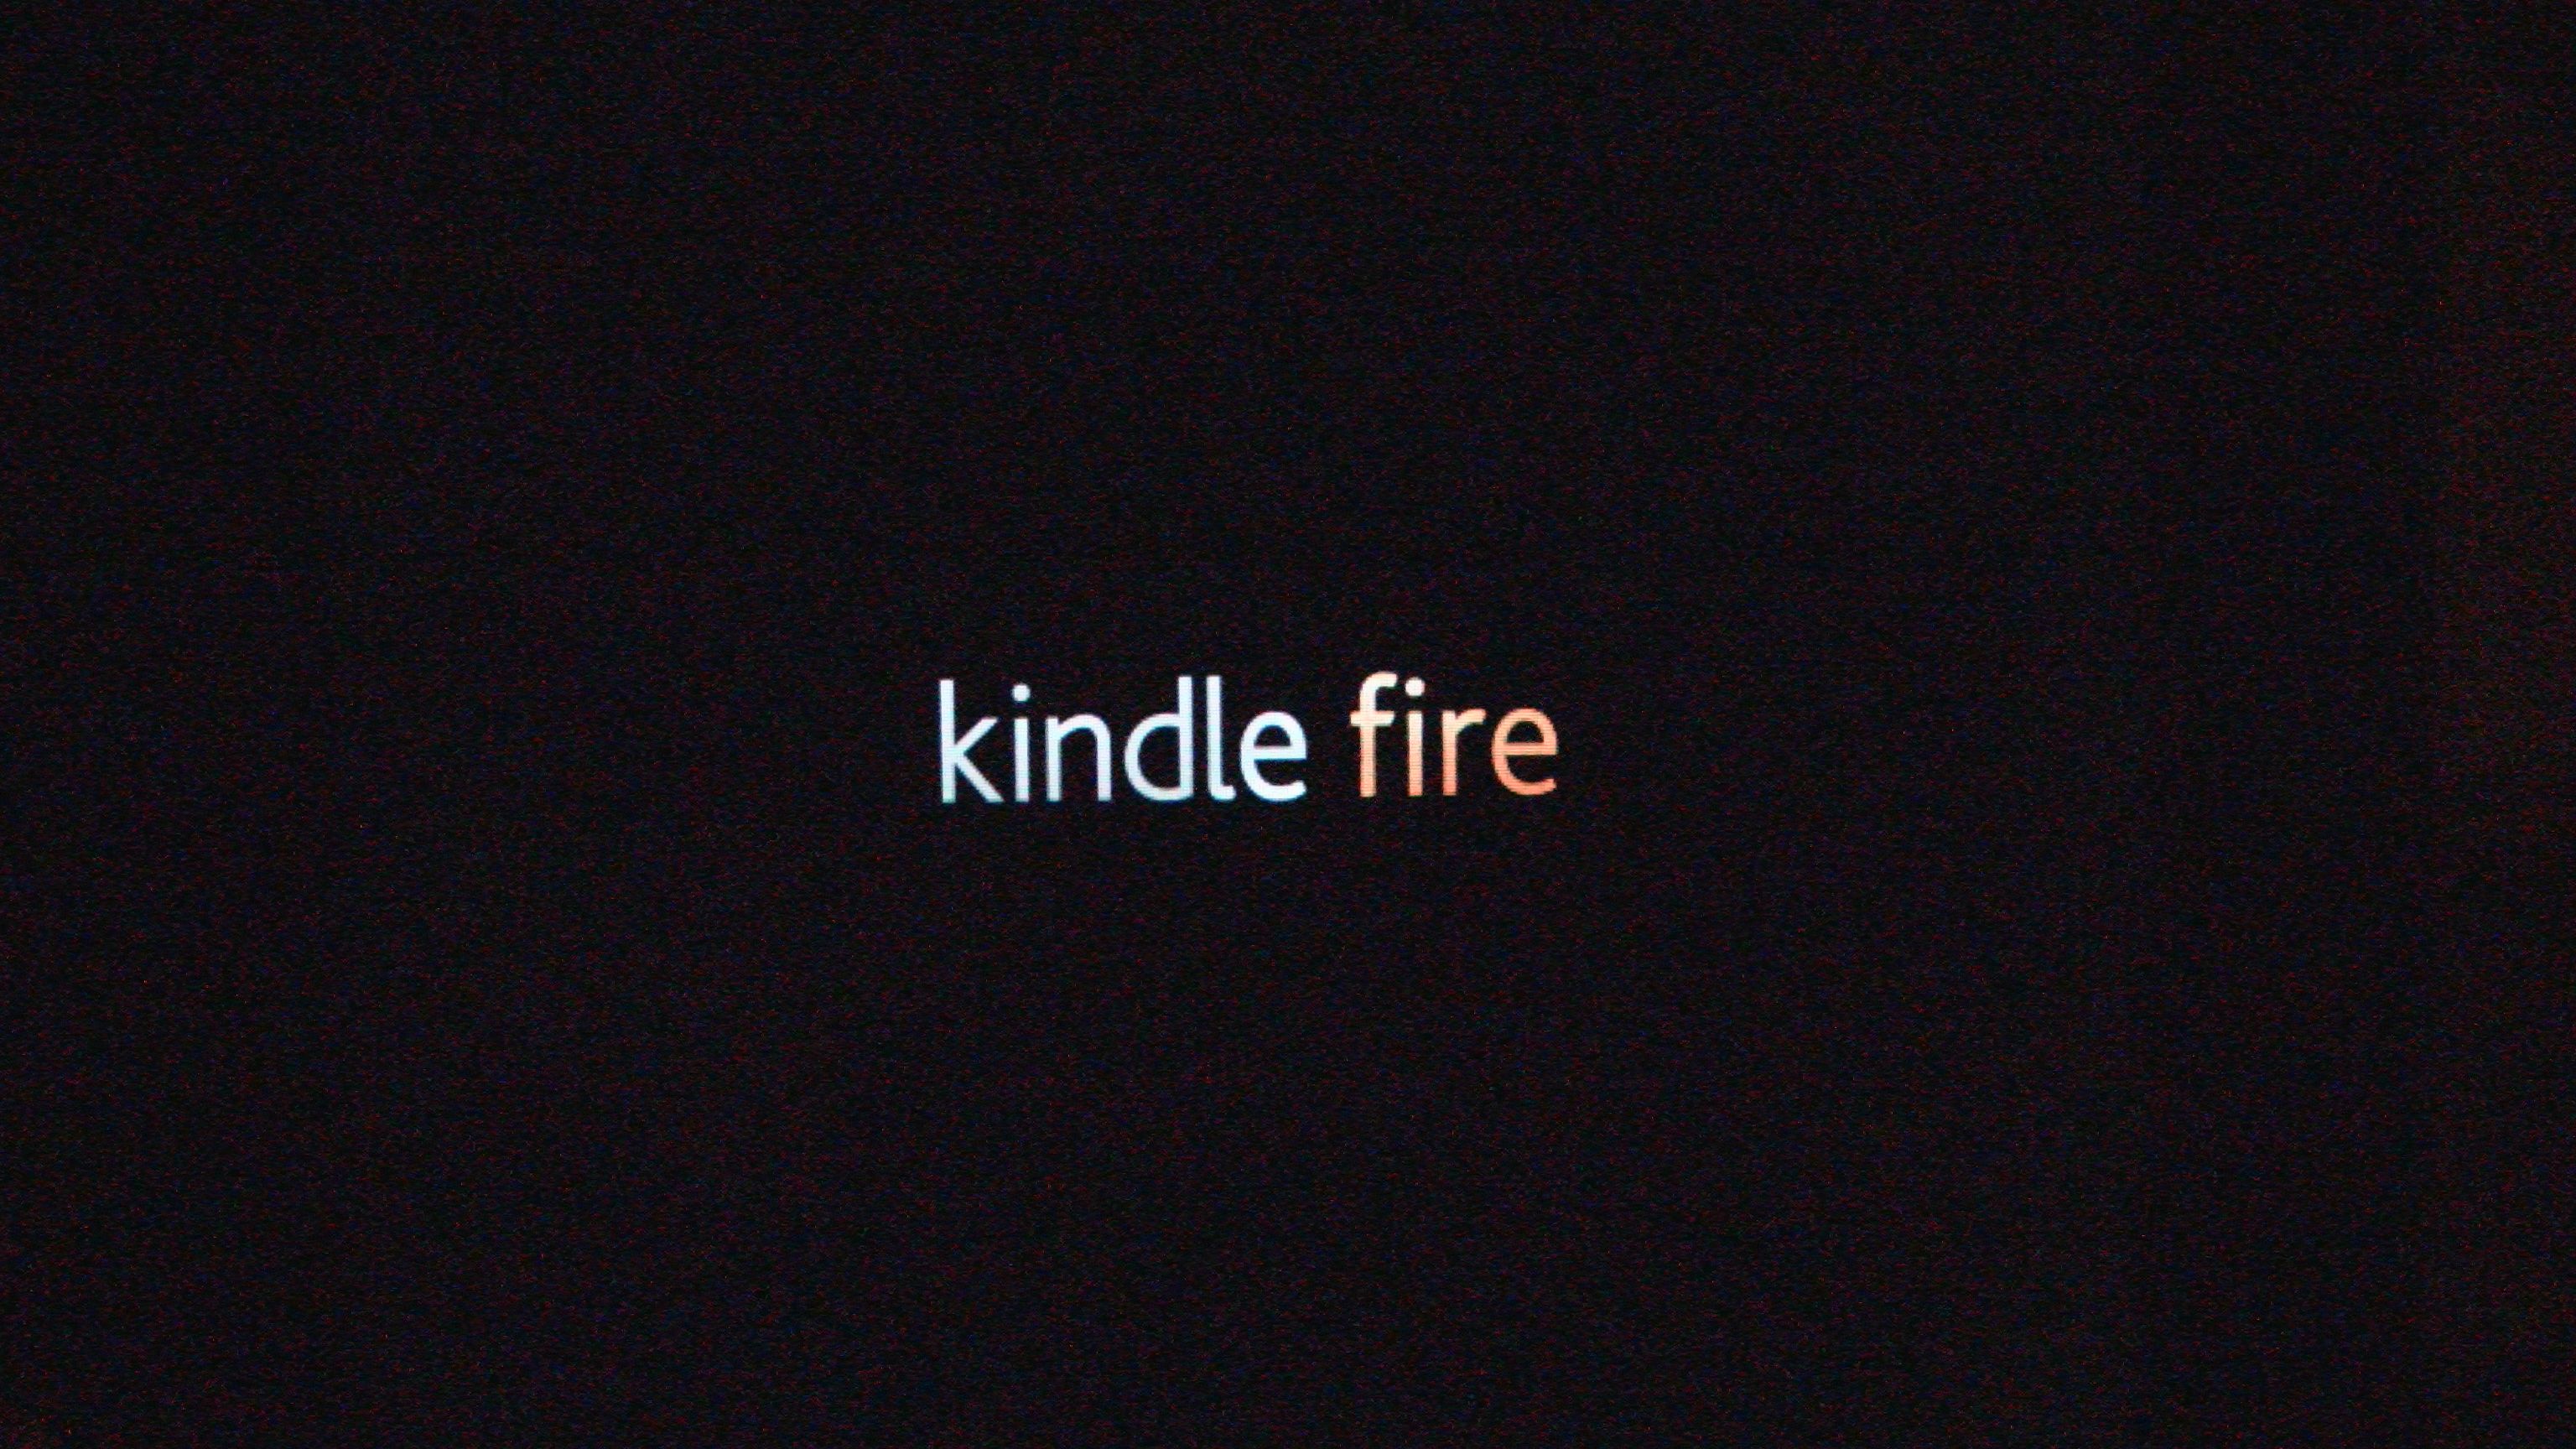 Amazon's new Kindle Fire Tablet is Hot! Owner Review | Booya Gadget